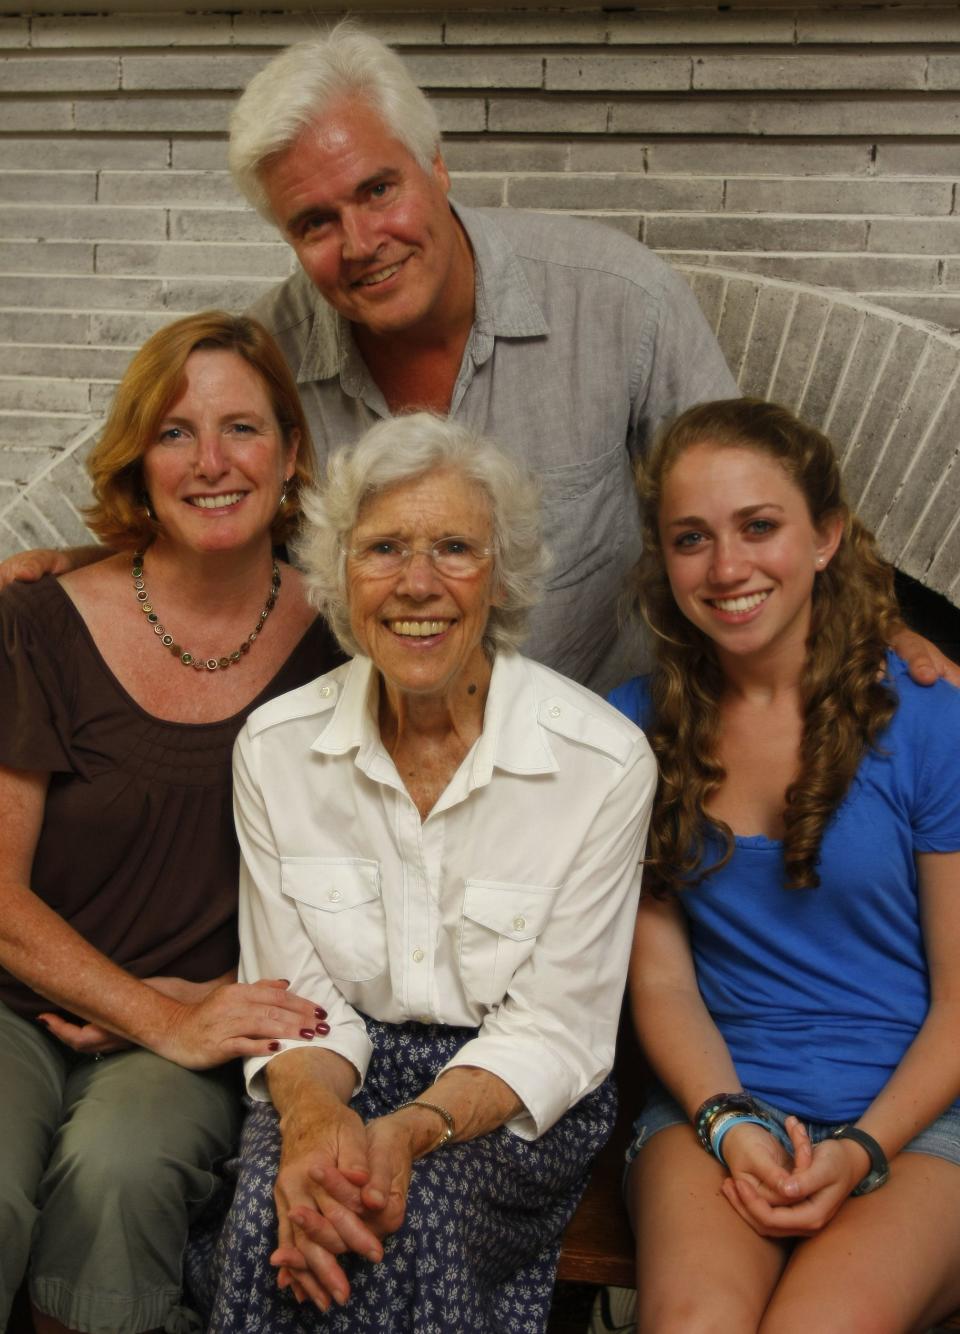 From left, Sarah Carlin, Frances Sternhagen, Micole Himelfarb and Paul Carlin at the Carlin home in the Sutton Manor neighborhood of New Rochelle in 2010. Sternhagen, a Tony-winning actor who was familiar to fans of TV's "Cheers," "Sex and the City" and "ER," died Nov. 27 at age 93.